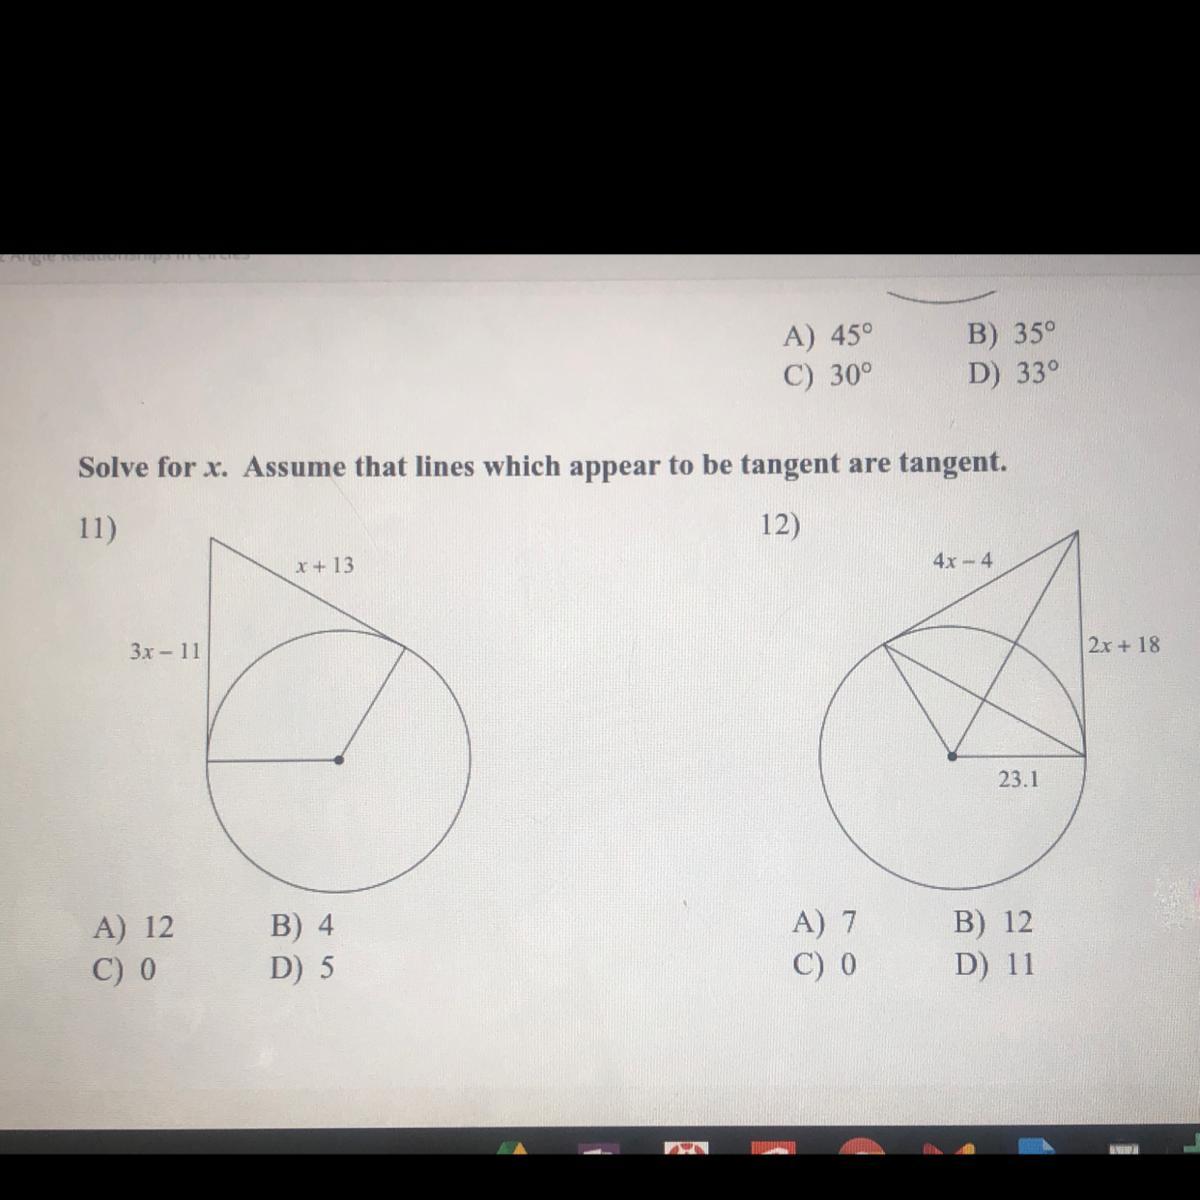 Ill Mark The Brainliest For The Correct Answer, Please Just Help Me 